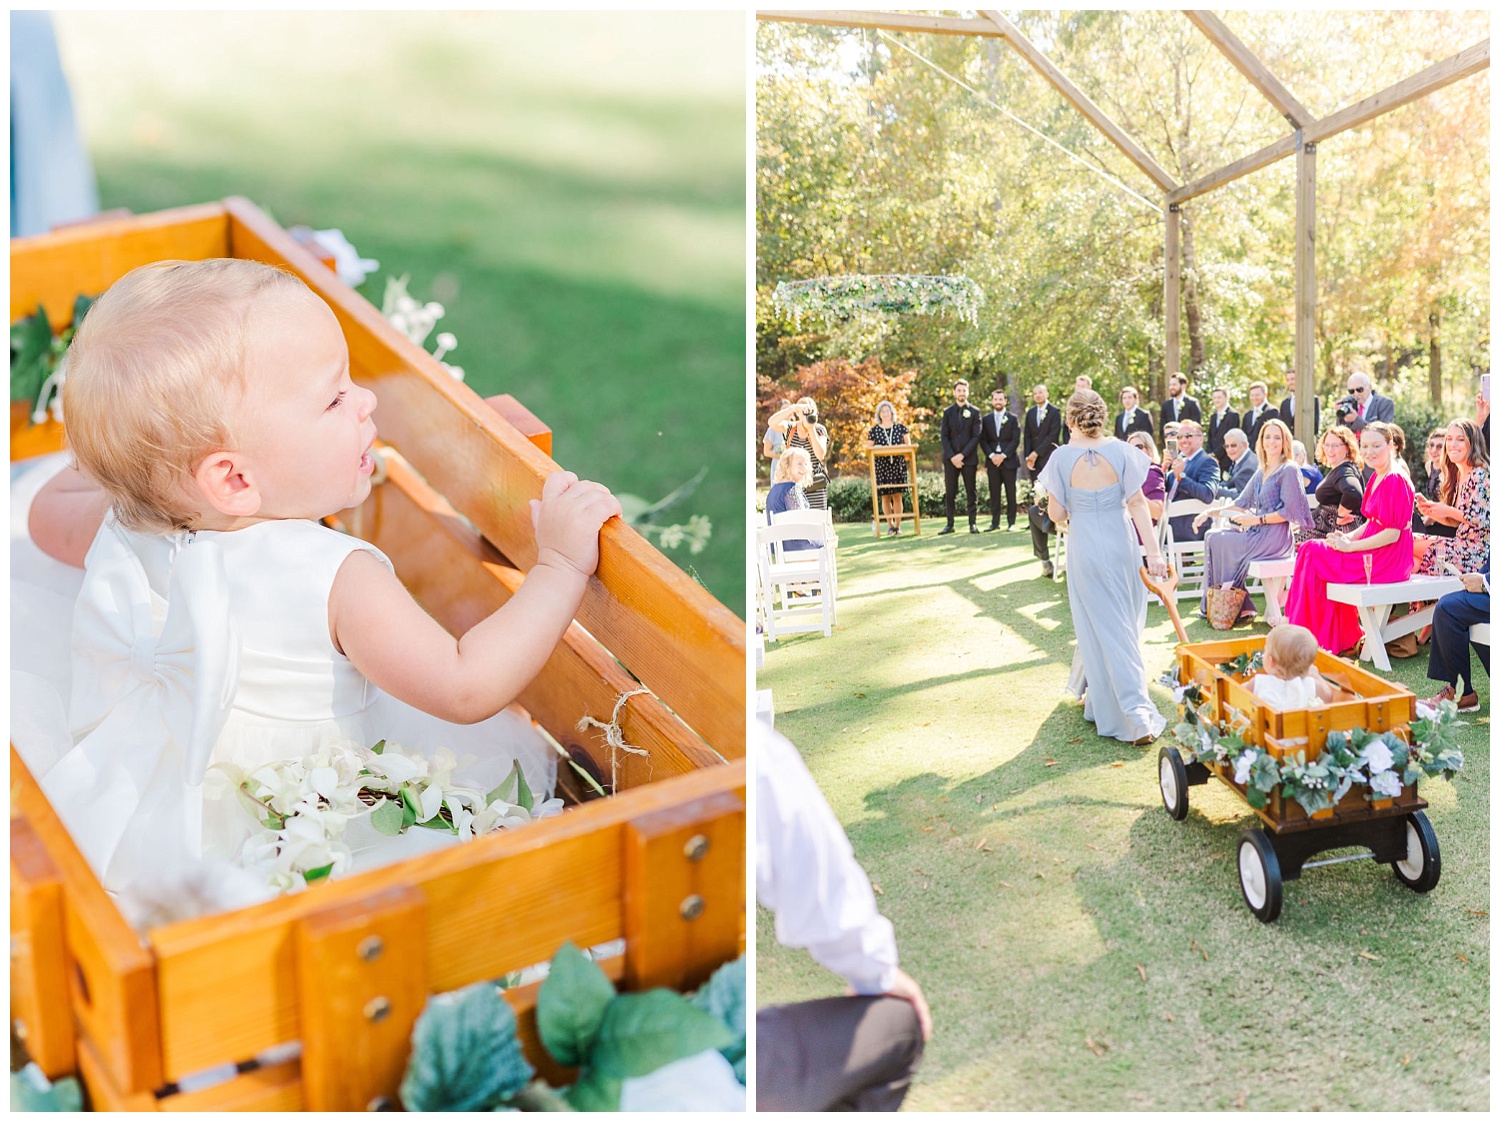 bride's niece coming down the aisle in a wagon